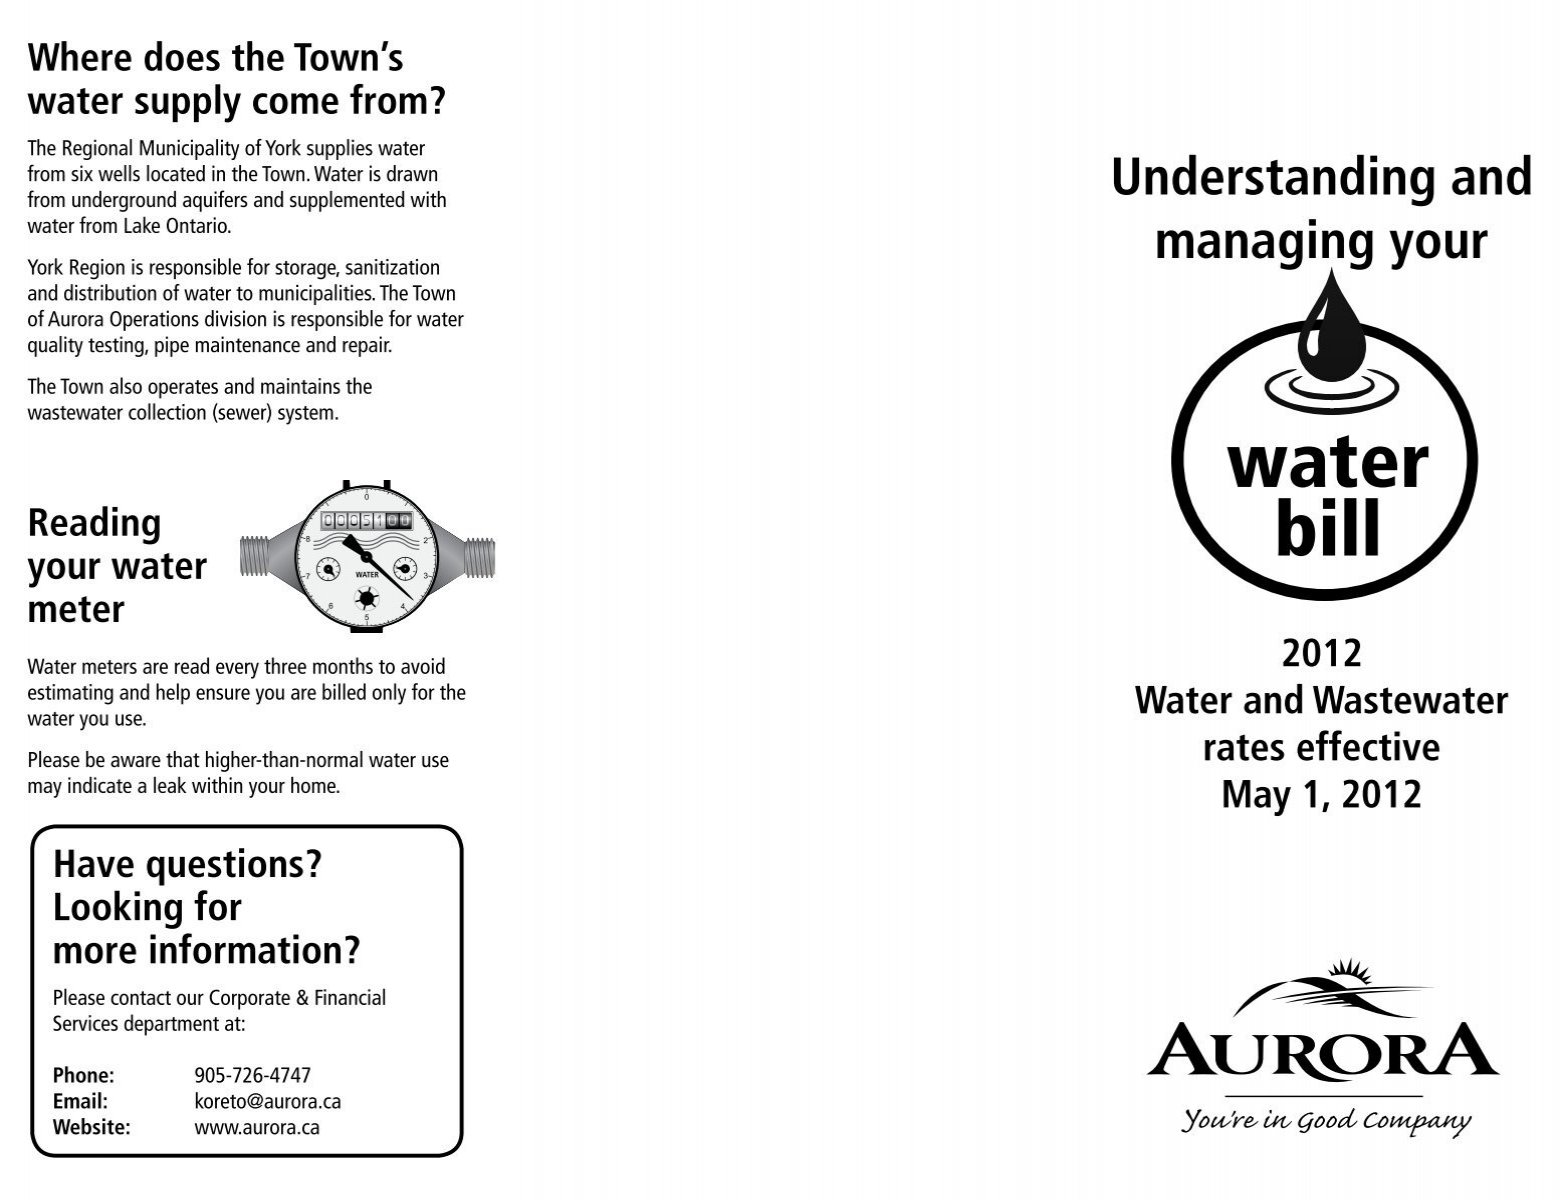 understanding-and-managing-your-water-bill-the-town-of-aurora